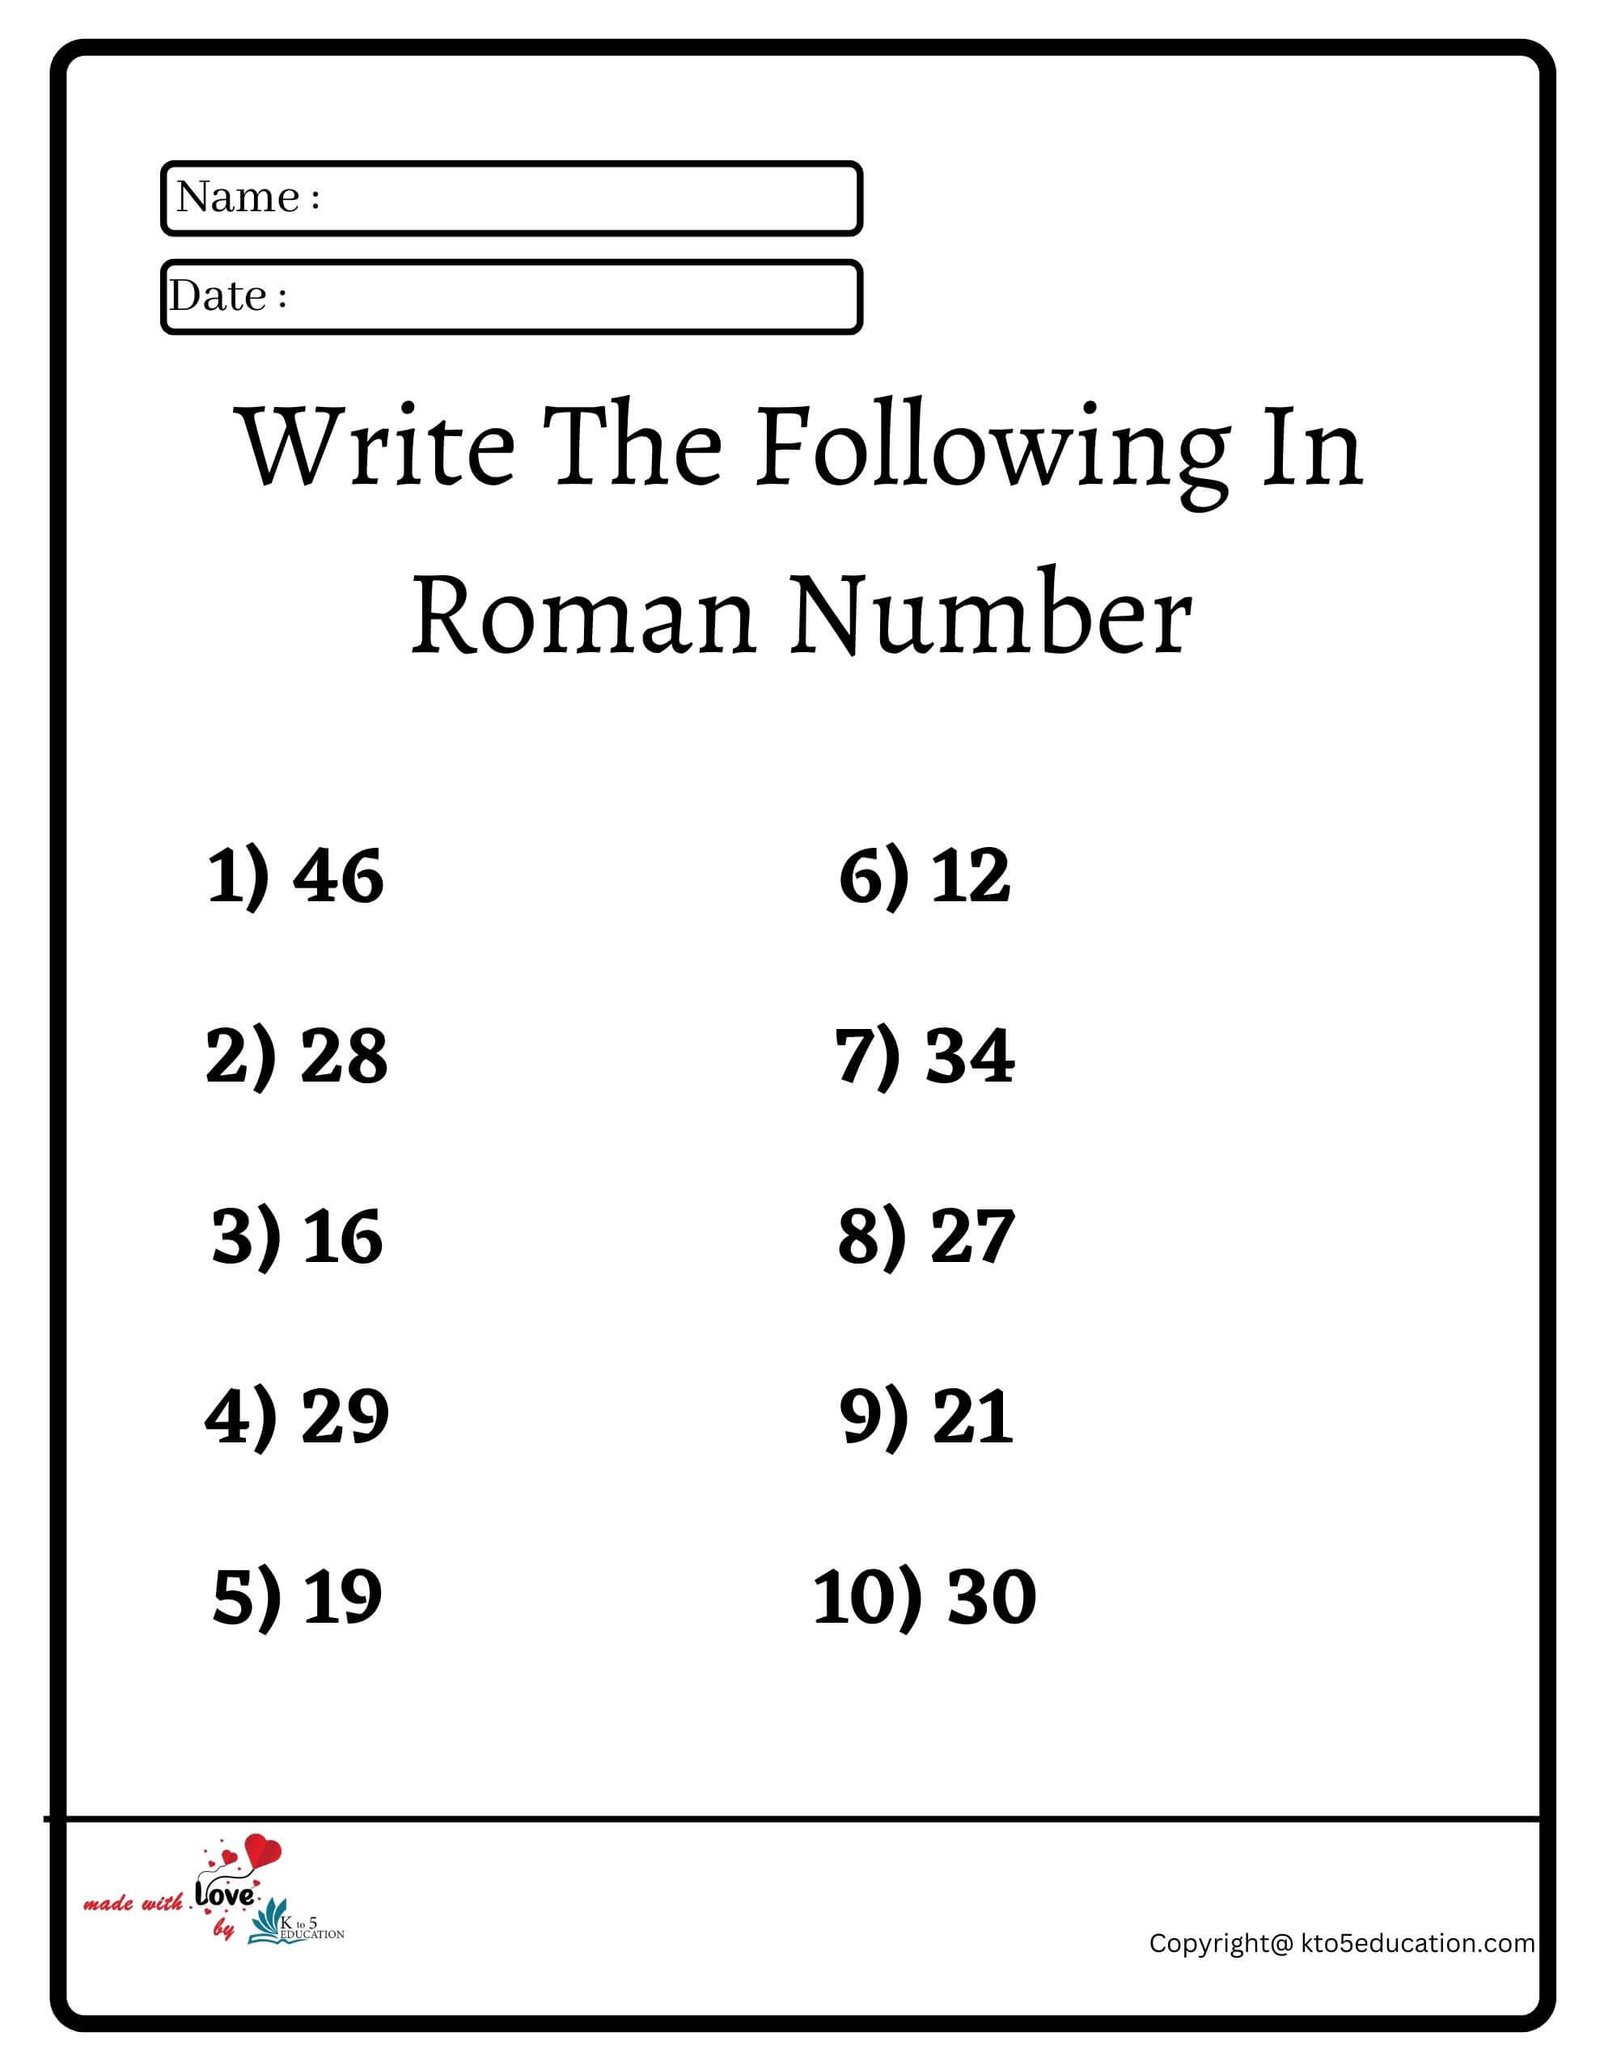 Write The Following In Roman Number Worksheet